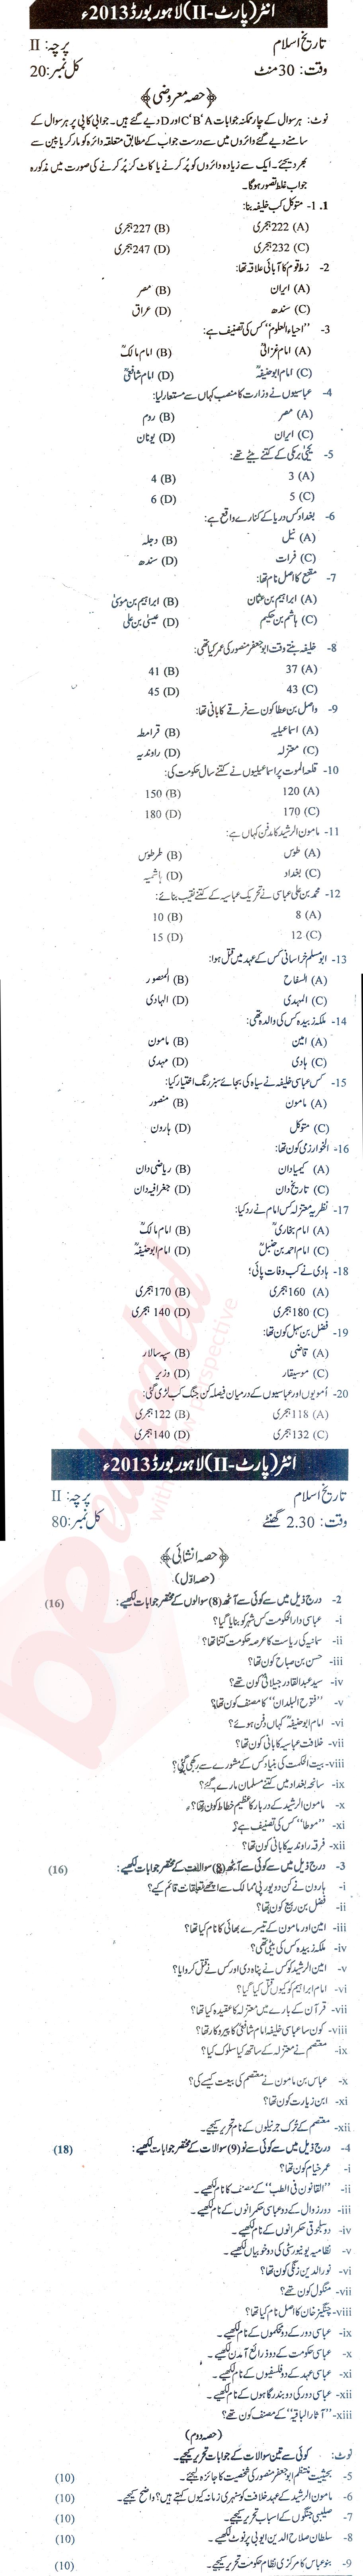 Islamic History FA Part 2 Past Paper Group 1 BISE Lahore 2013